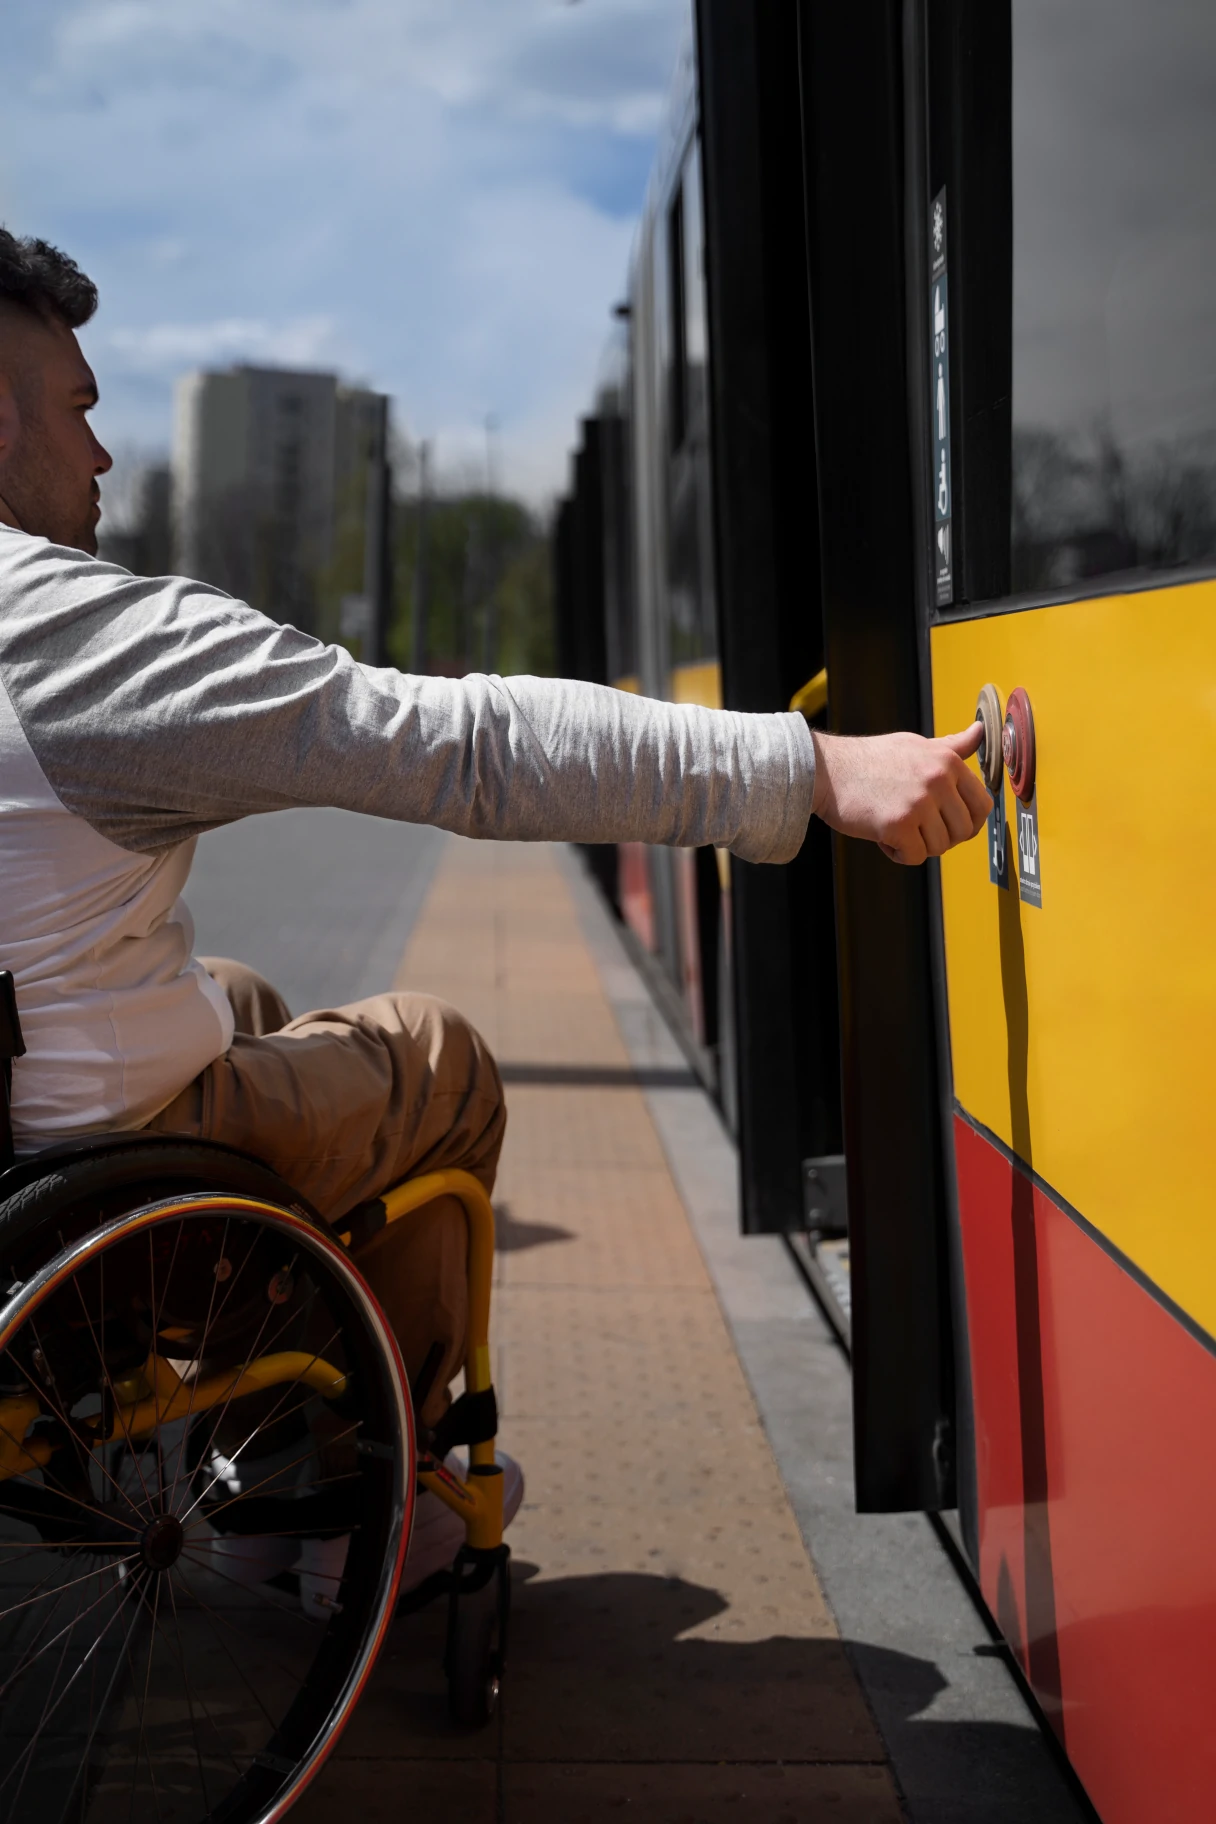 Man in a wheelchair wants to get on the streetcar and presses the door button